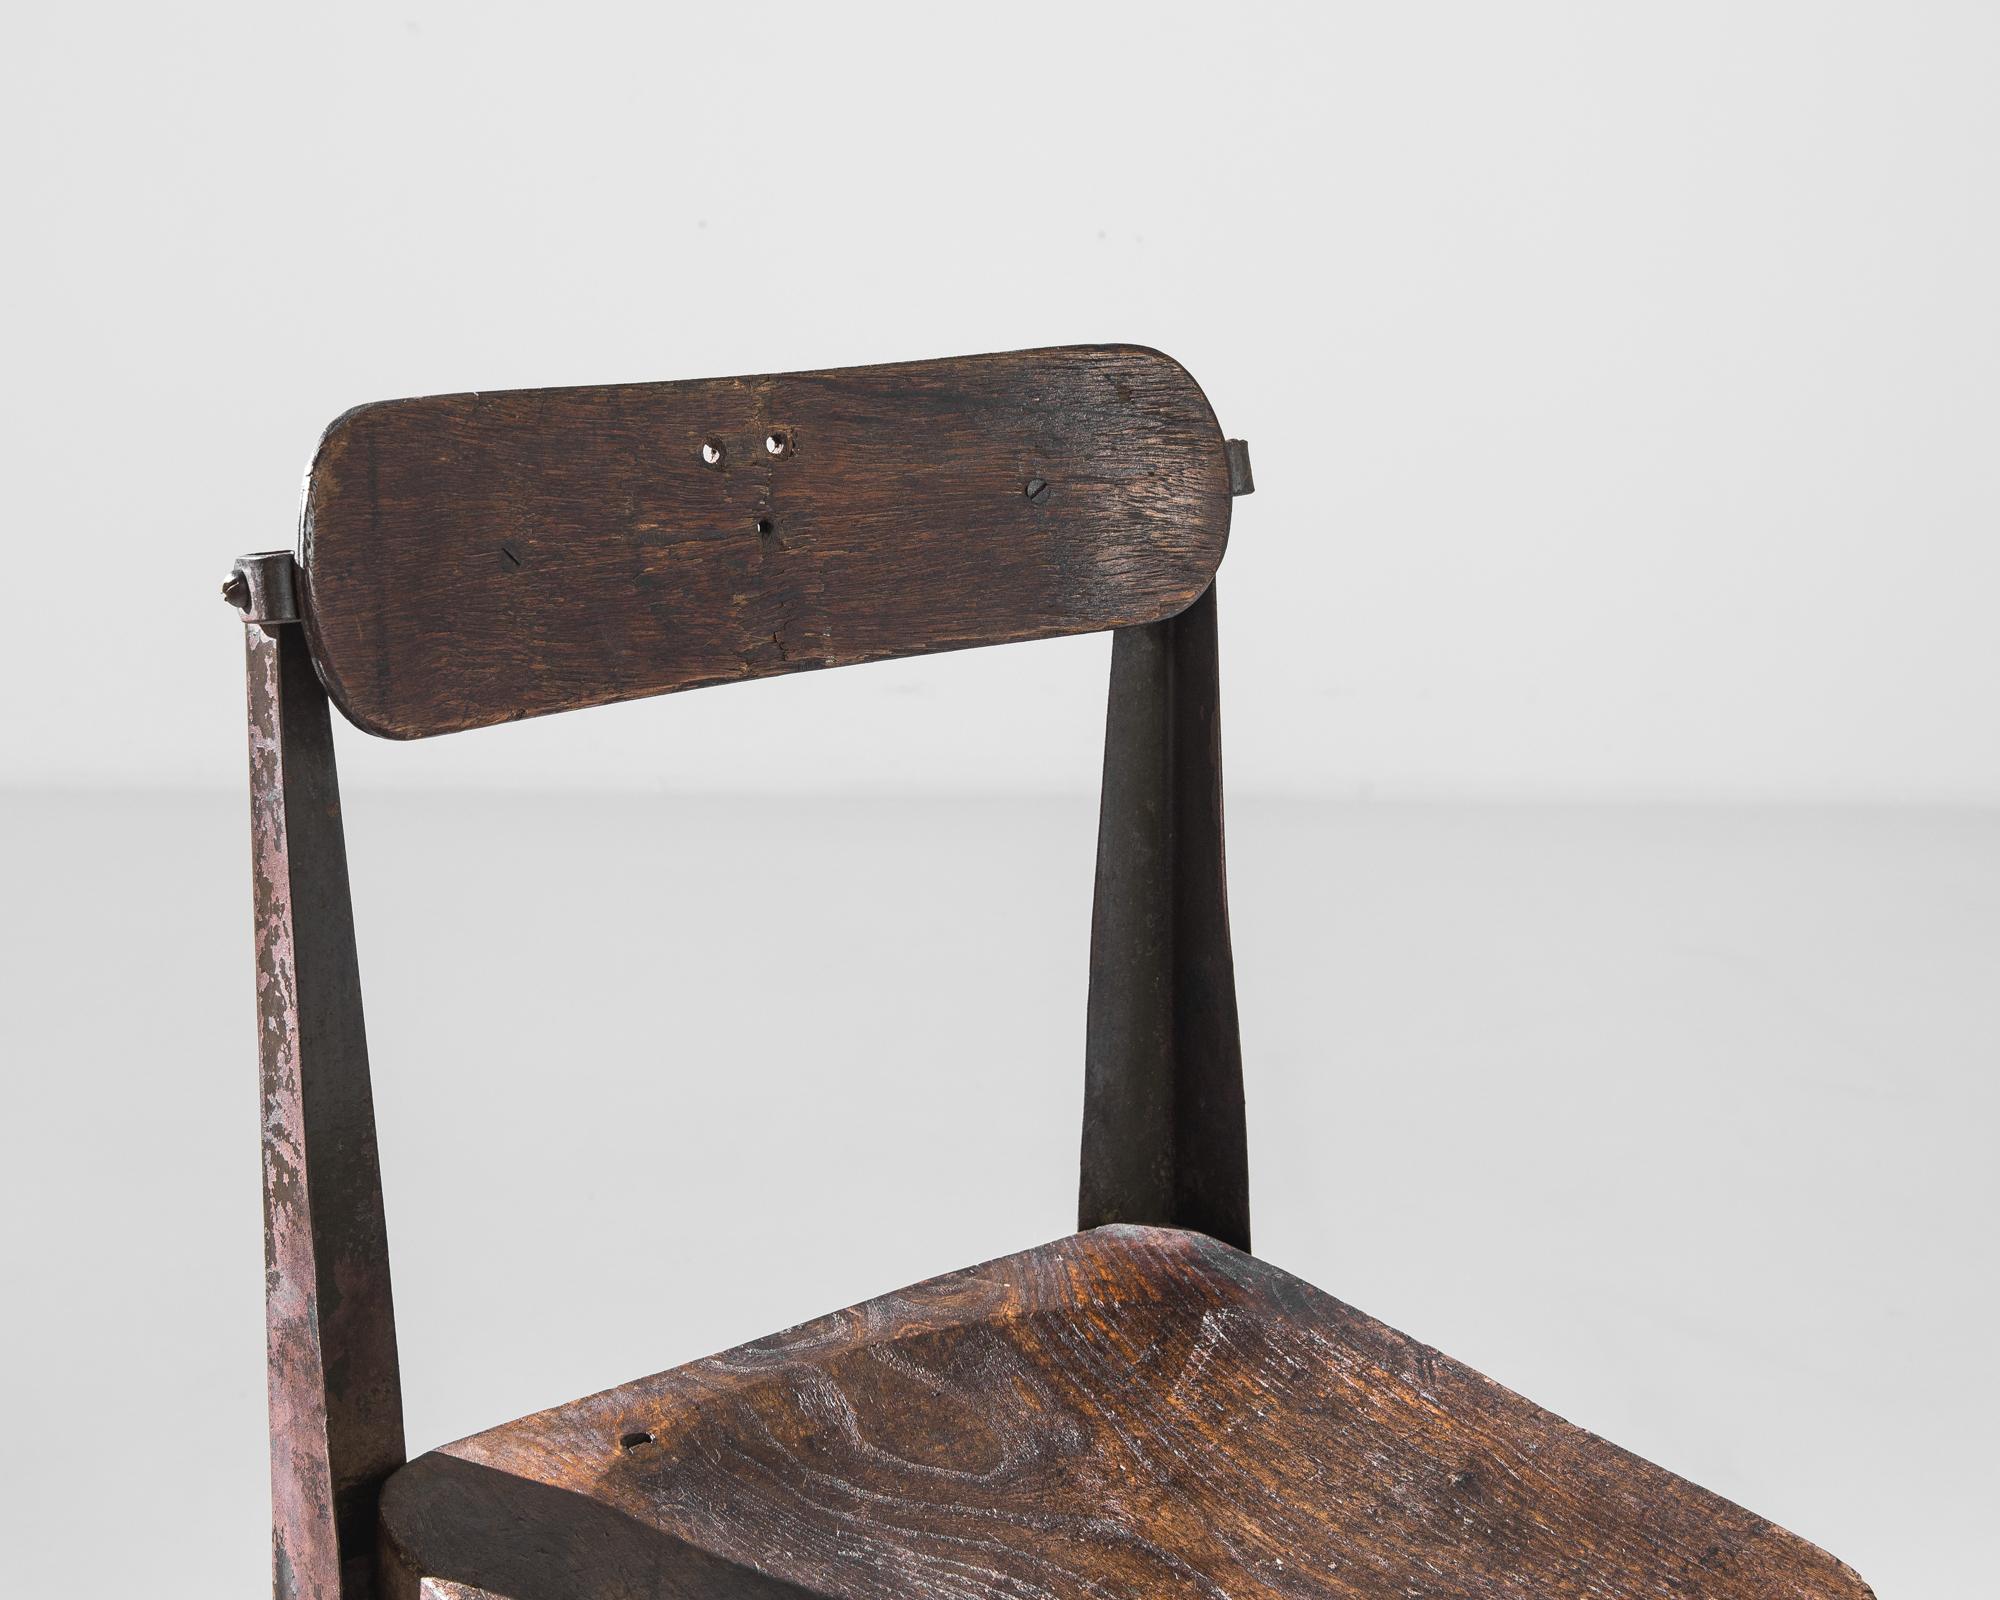 A metal chair with wooden seat and back from the United Kingdom, produced circa 1900. A metal frame accent chair with four L-shaped, slightly angled legs connected by an x-shaped stretcher, featuring an adjustable hinged wooden seat back. This seat